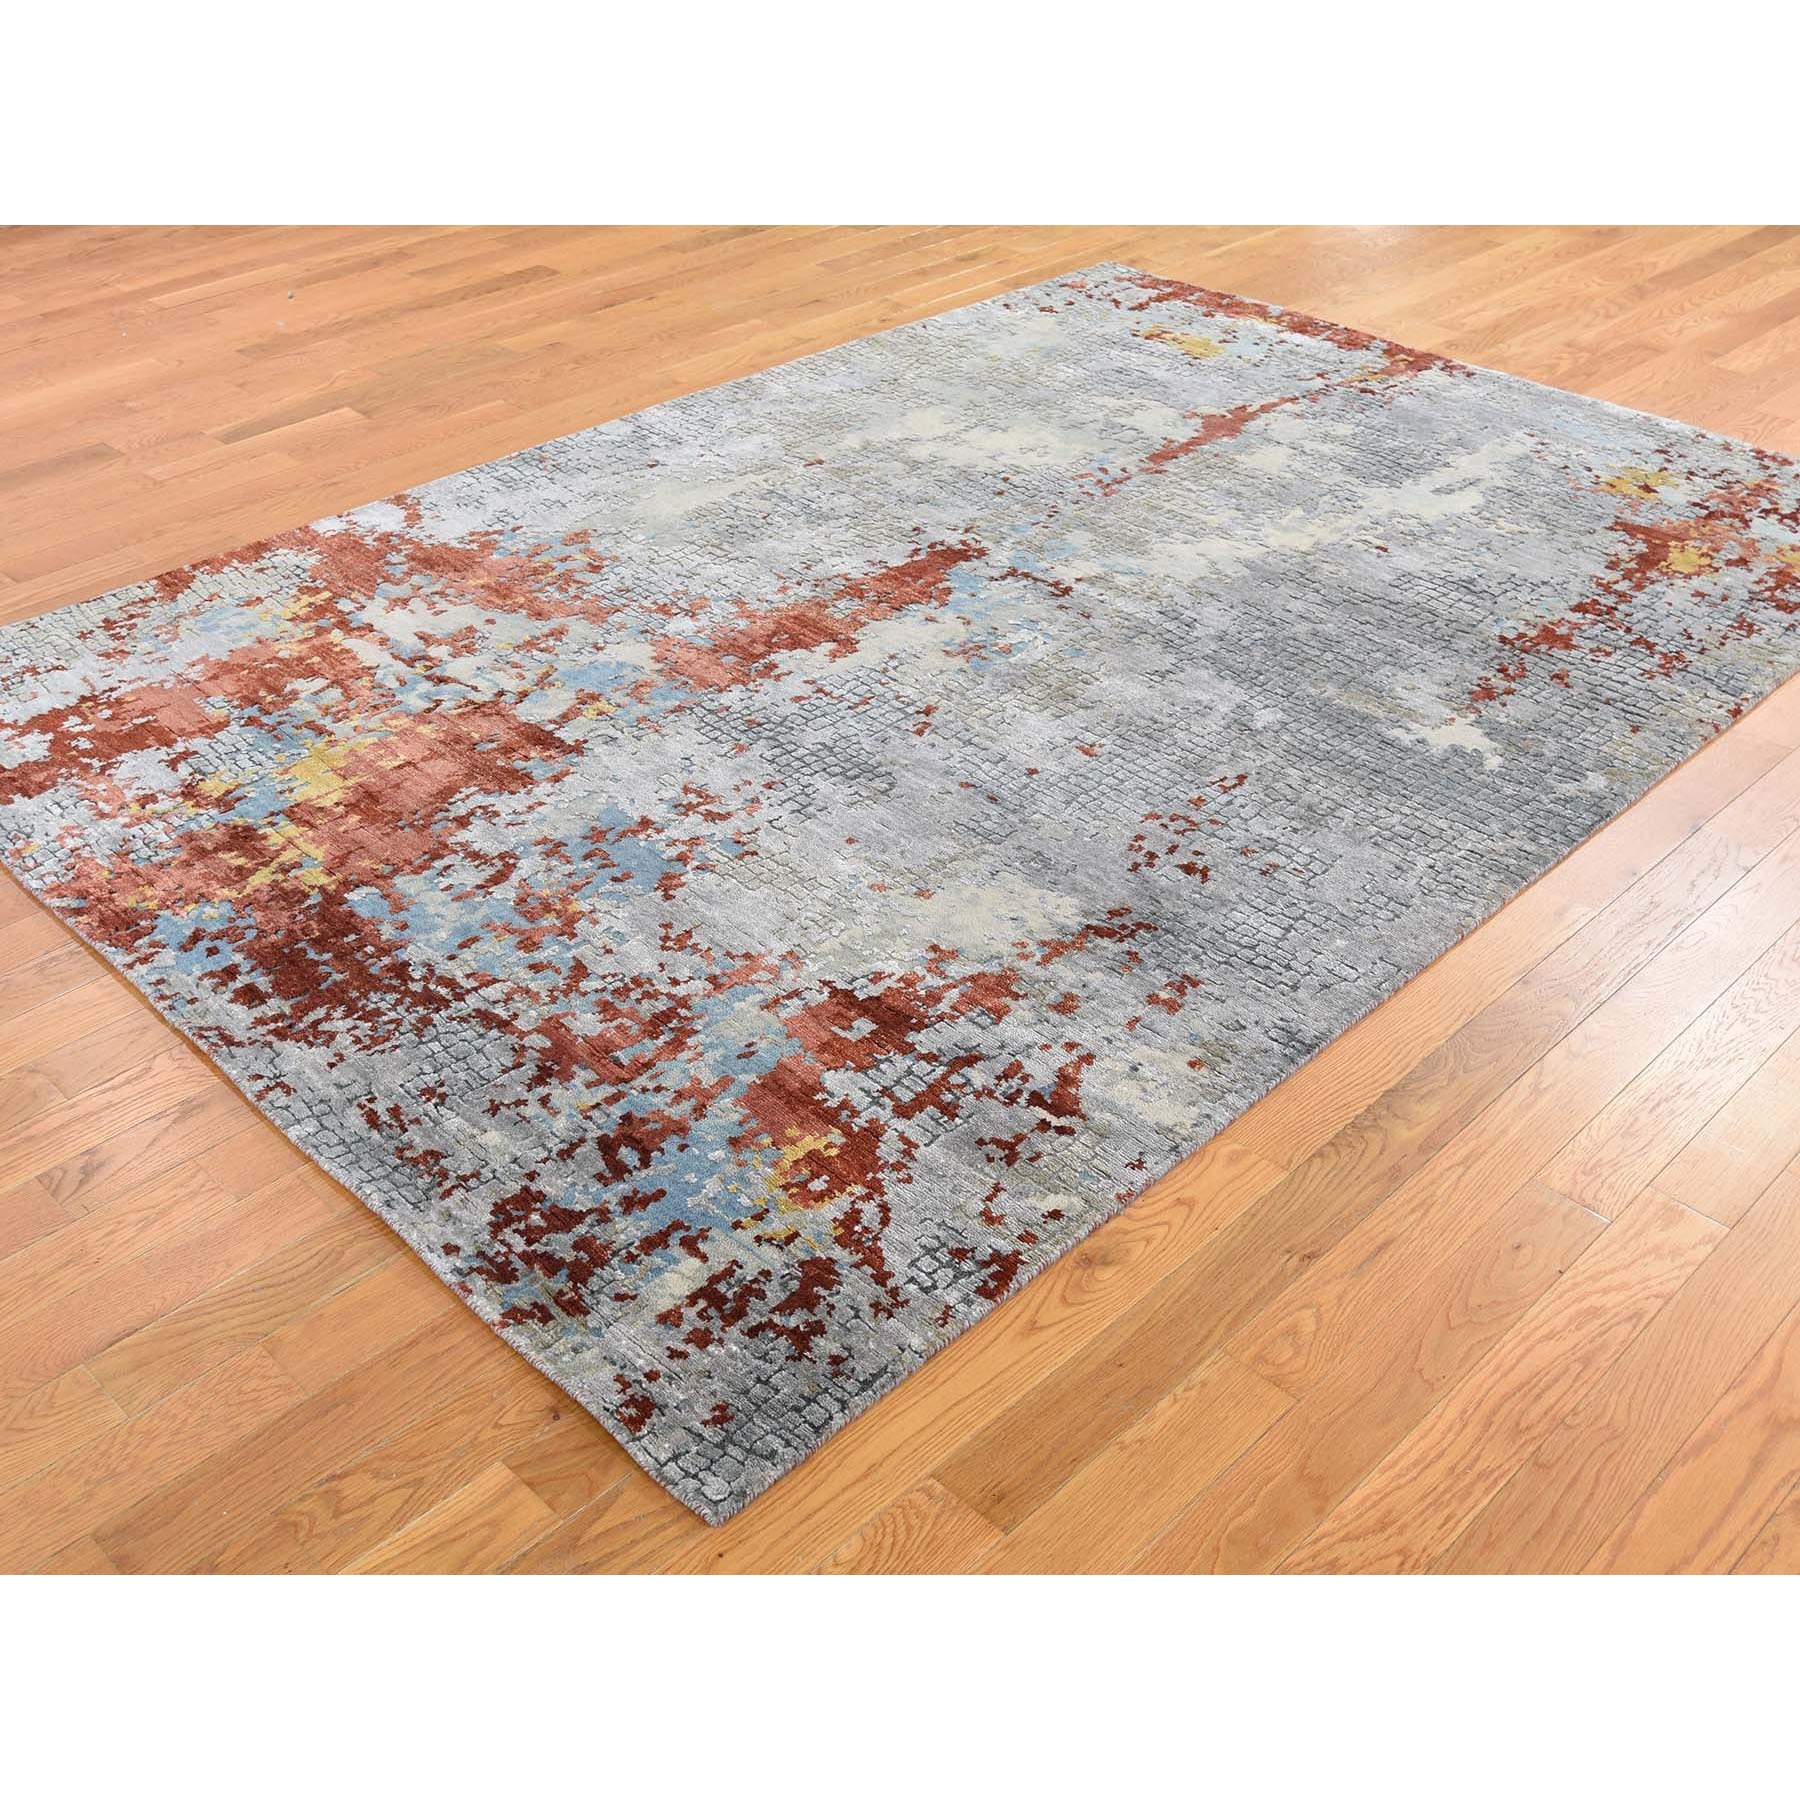 5-x8- Wool And Silk Abstract With Fire Mosaic Design Hand-Knotted Oriental Rug 